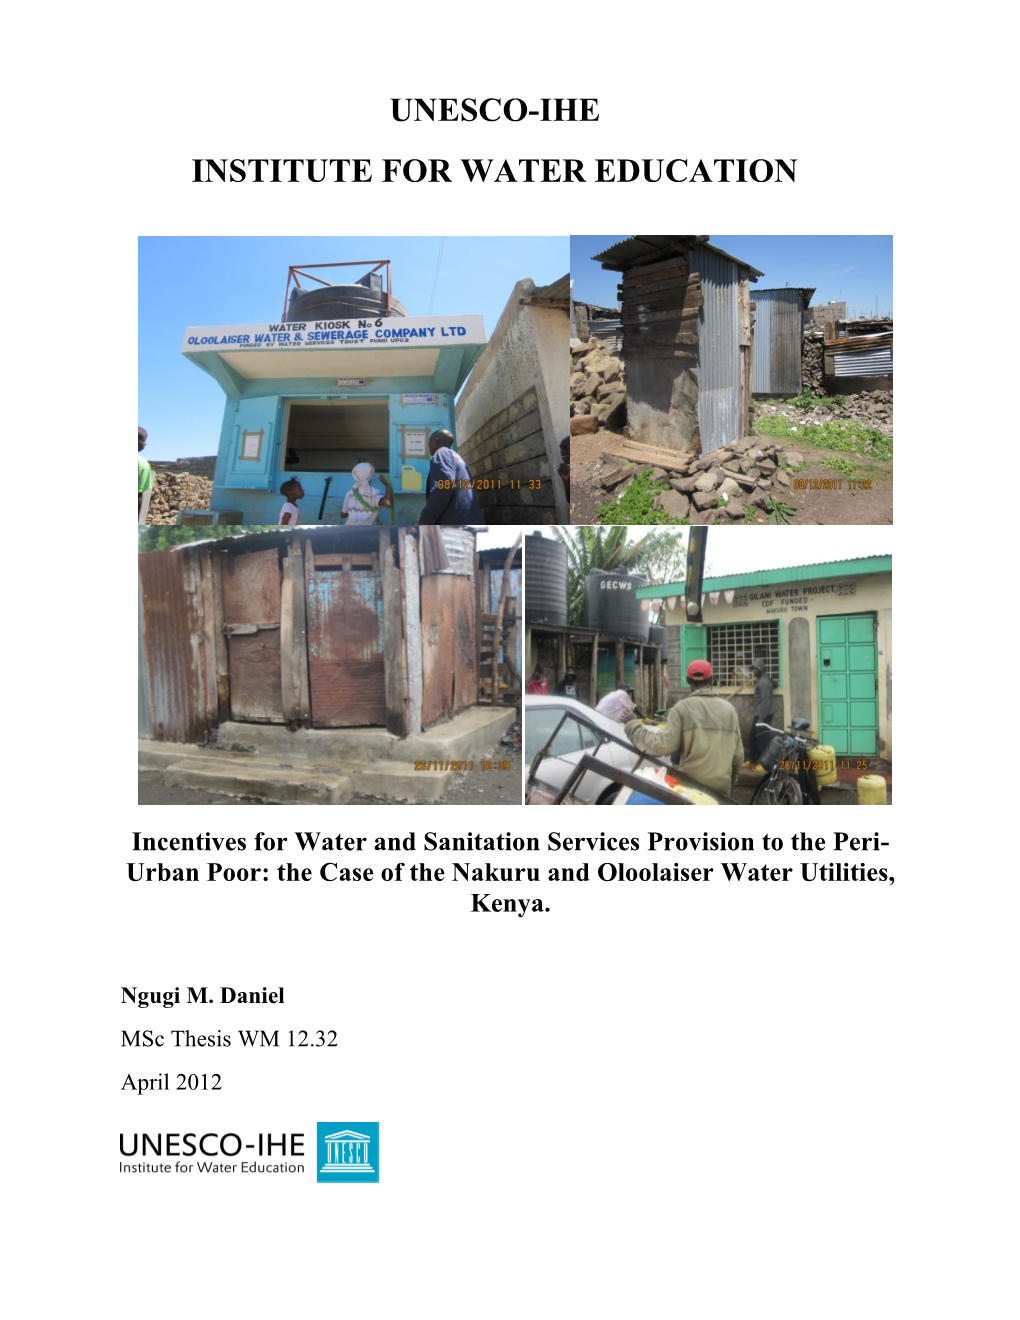 UNESCO-IHE Institute for Water Education, Delft, the Netherlands